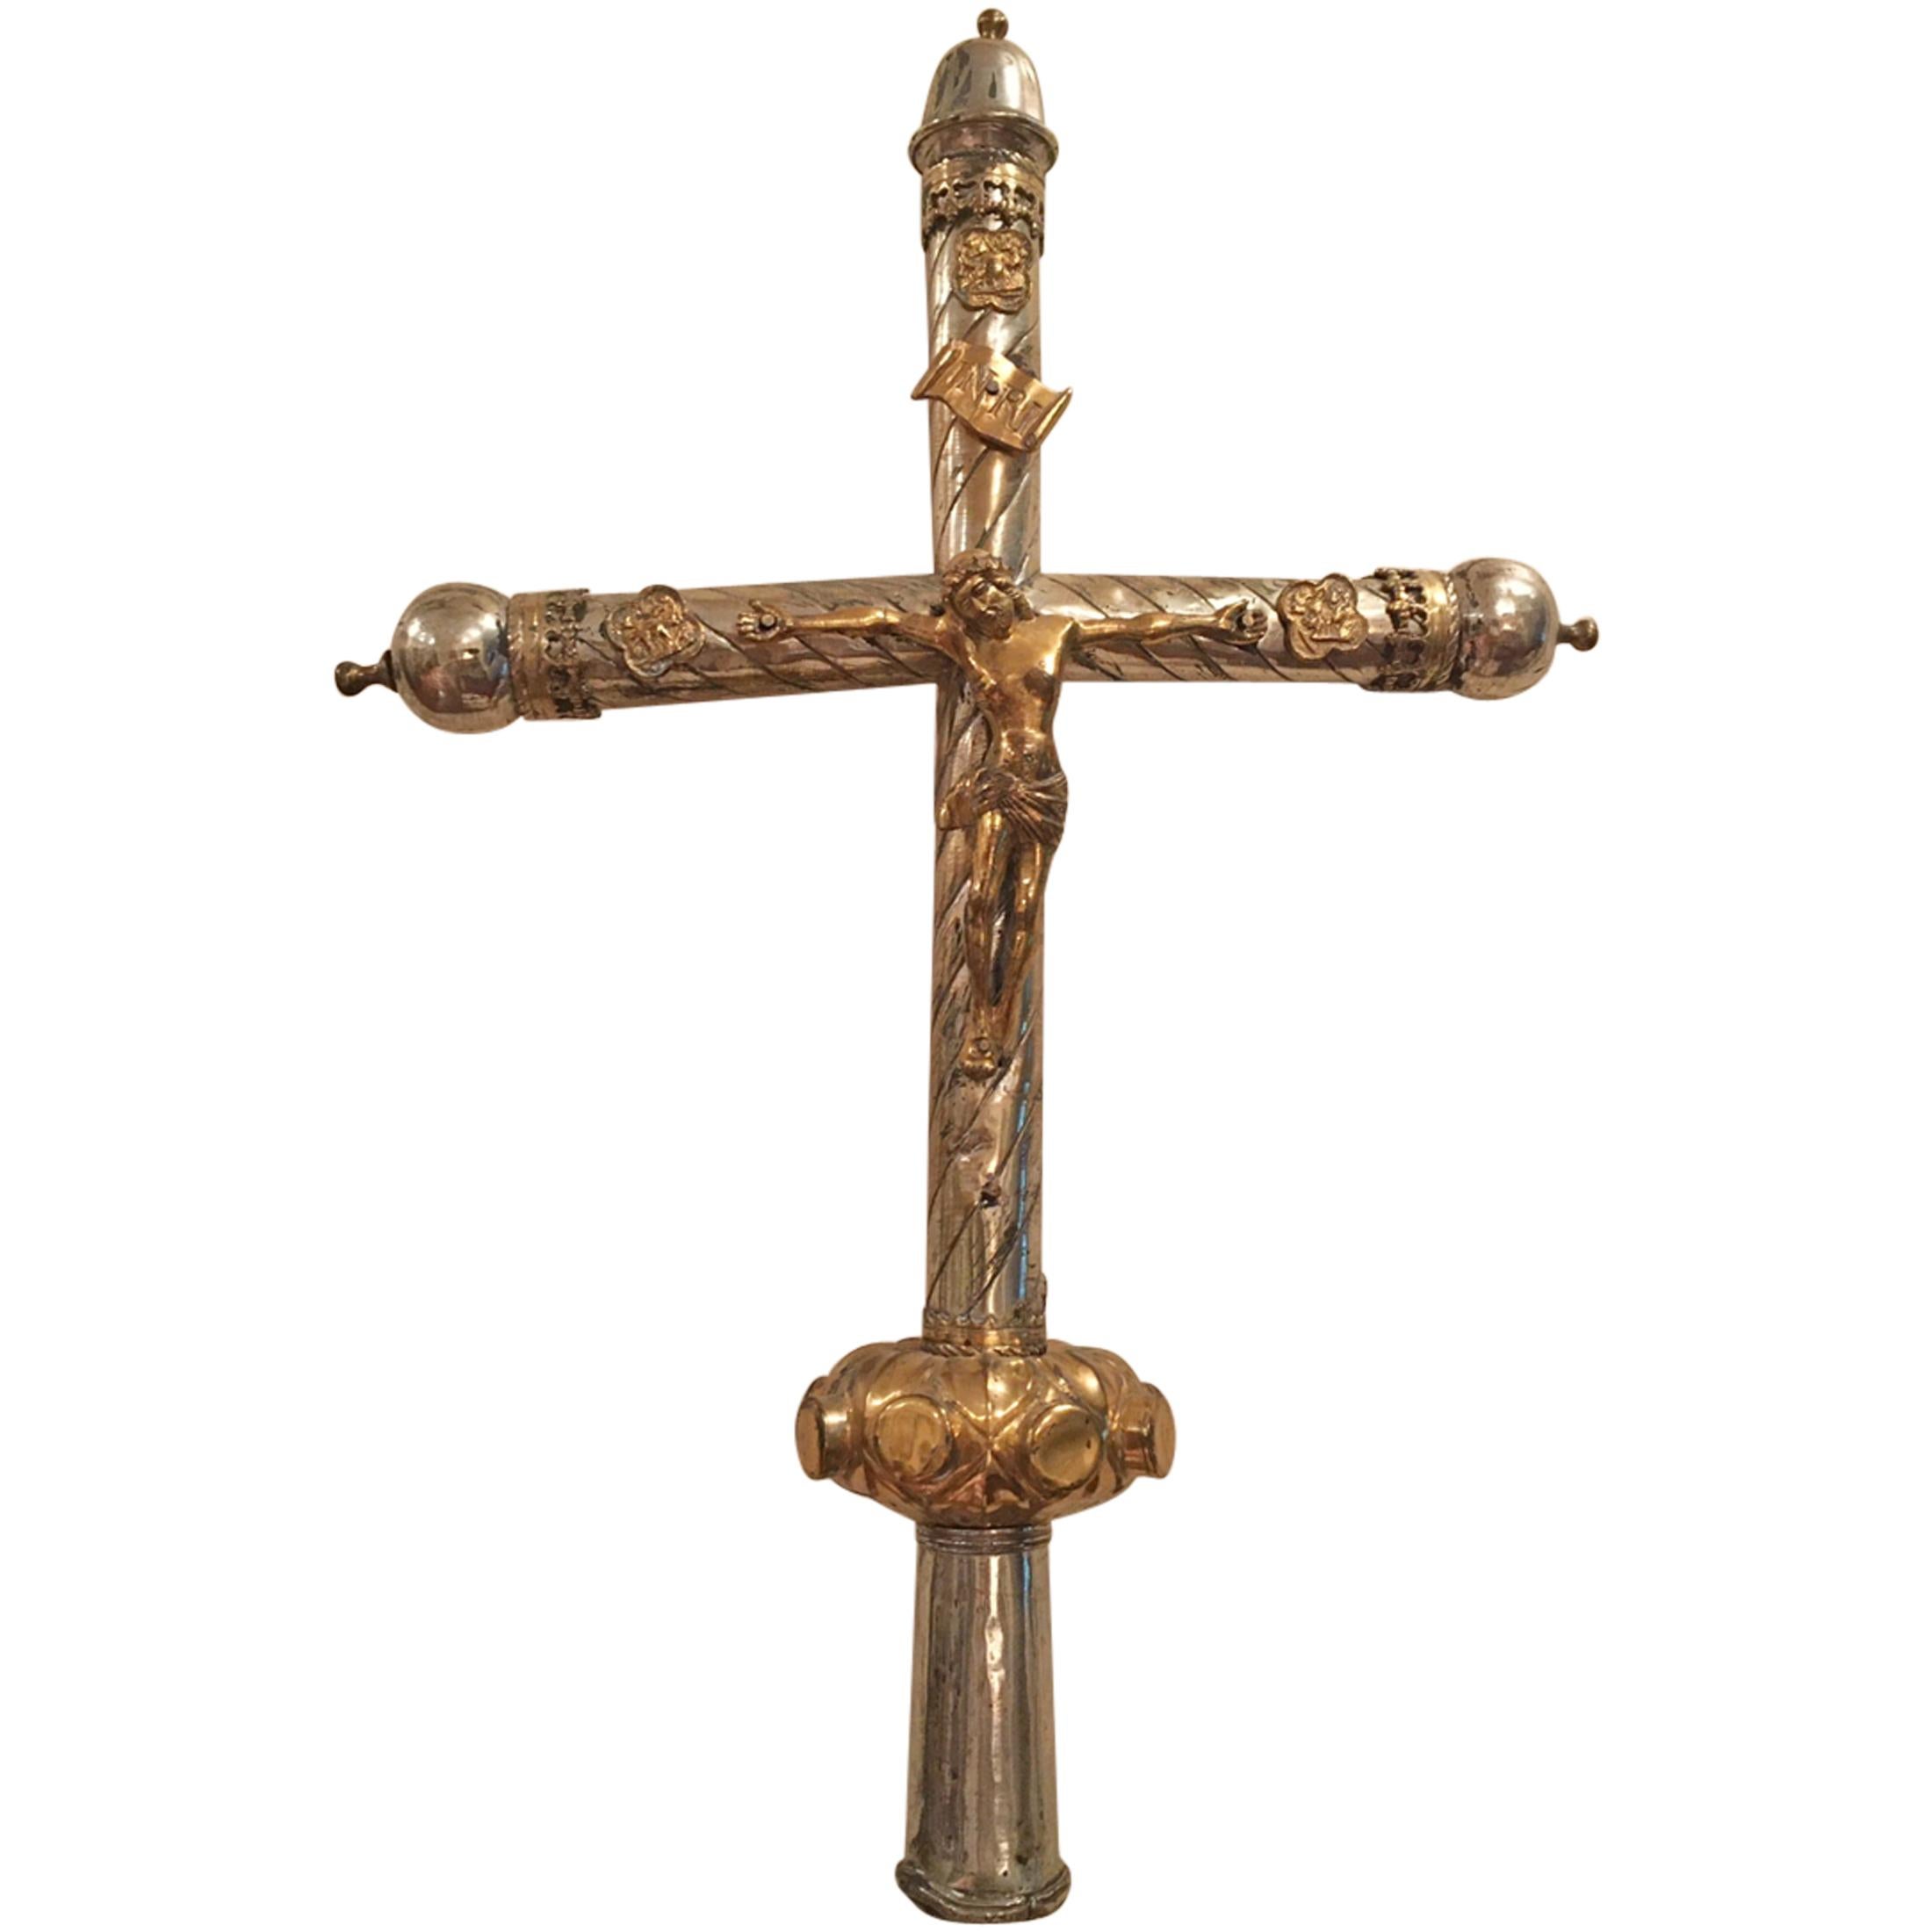 Period Renaissance Early 16th Century Processional Cross, France